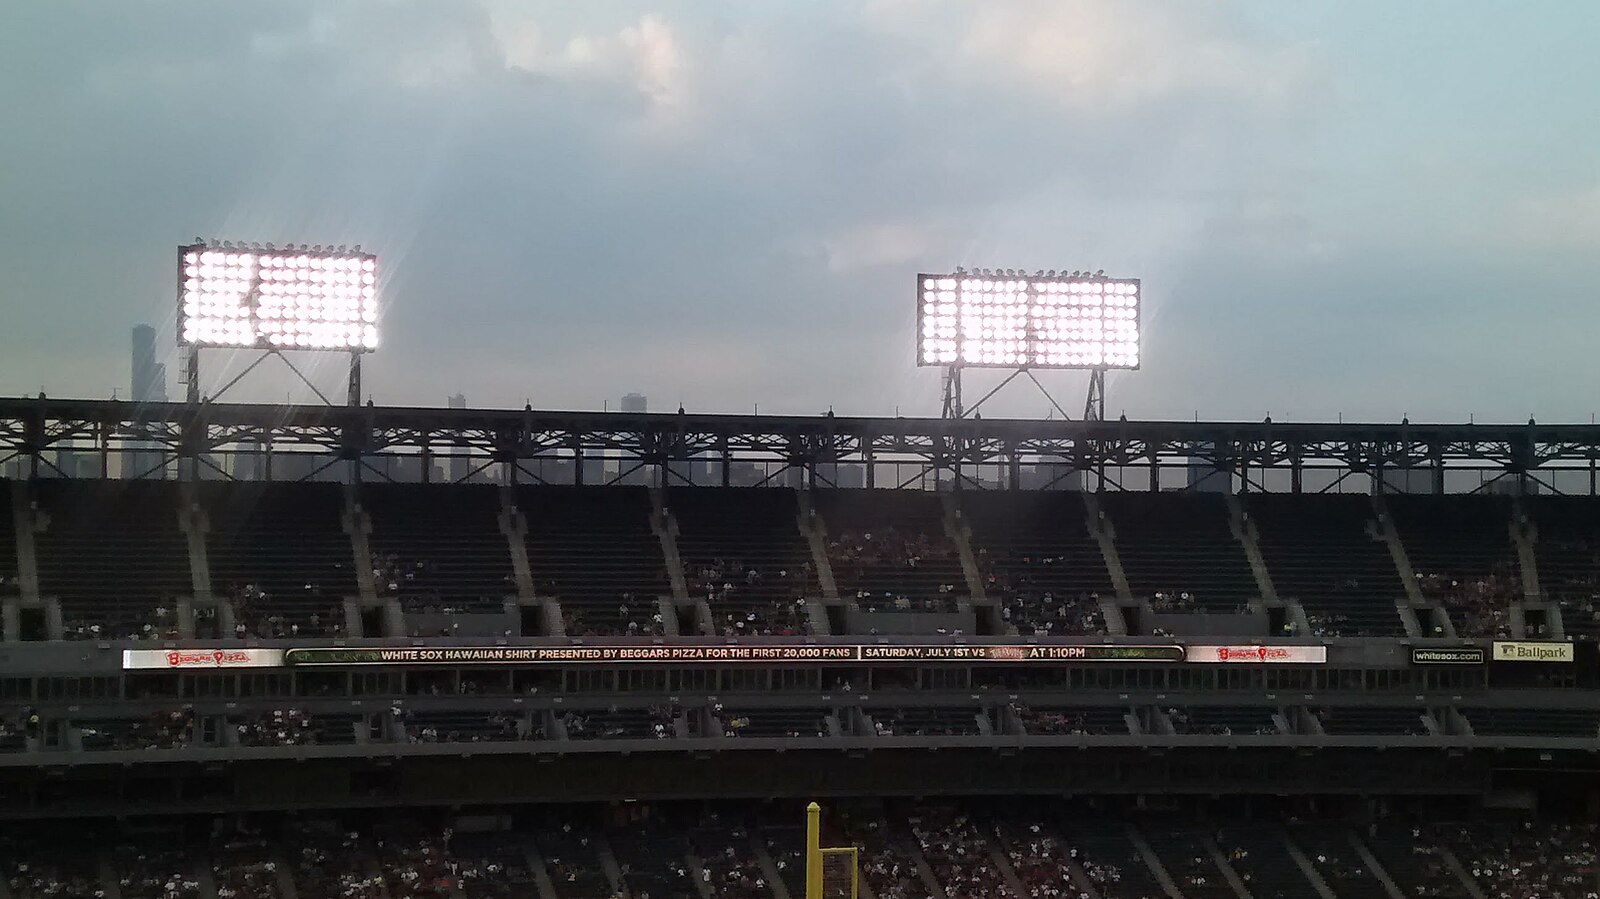 The Chicago skyline overlooking the upper deck behind third base at Guaranteed Rate Field on June 30, 2017